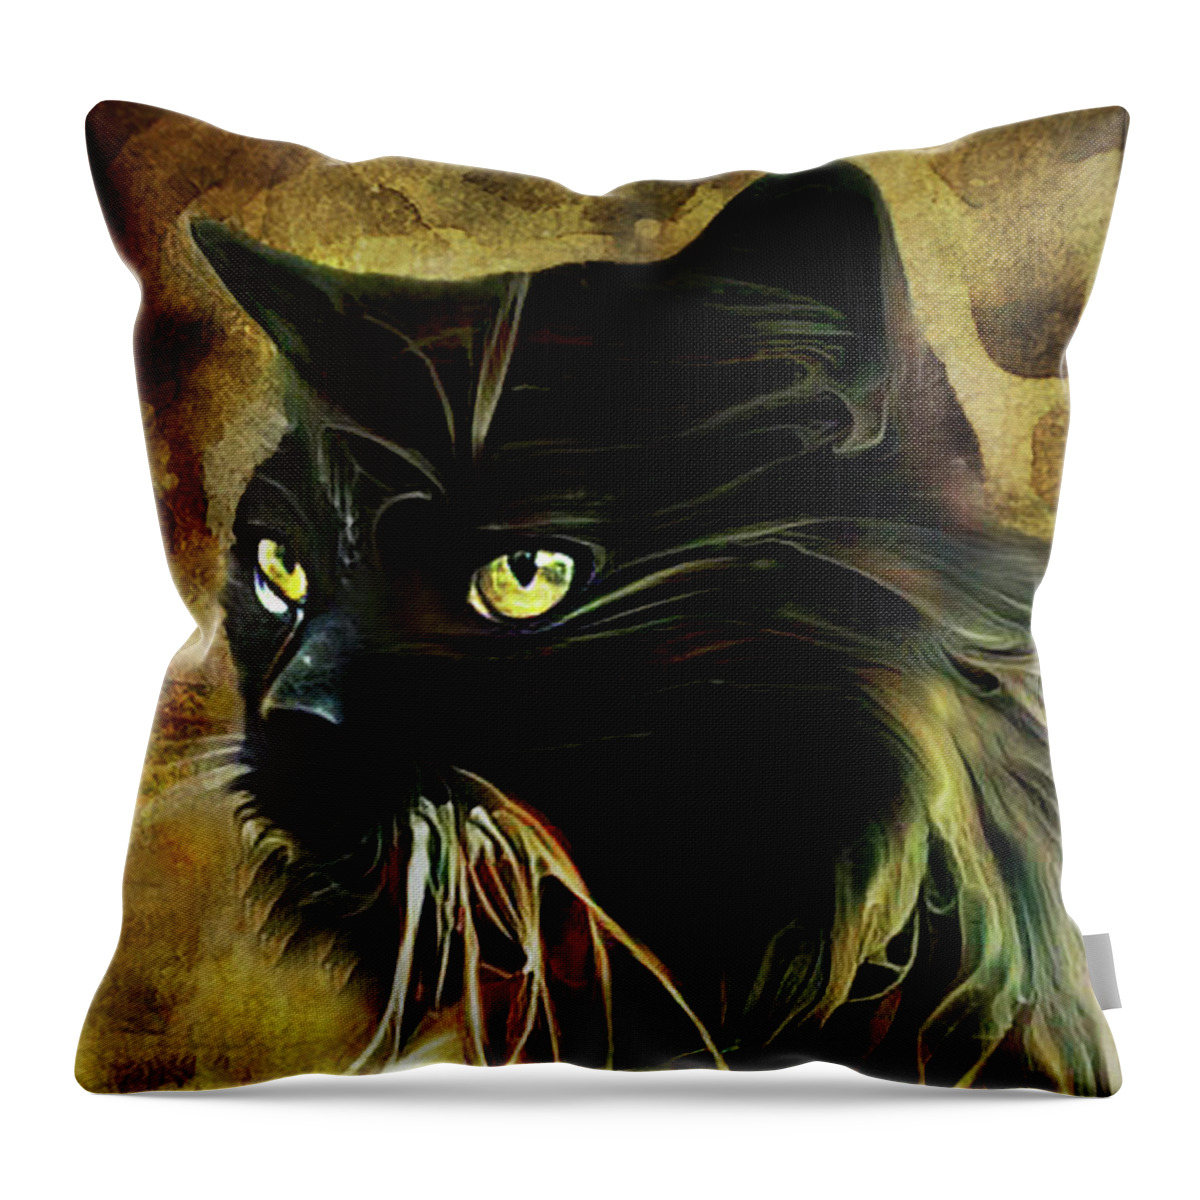 Tuxedo Cat Throw Pillow featuring the mixed media Merlin the Tuxedo Maine Coon Cat by Peggy Collins